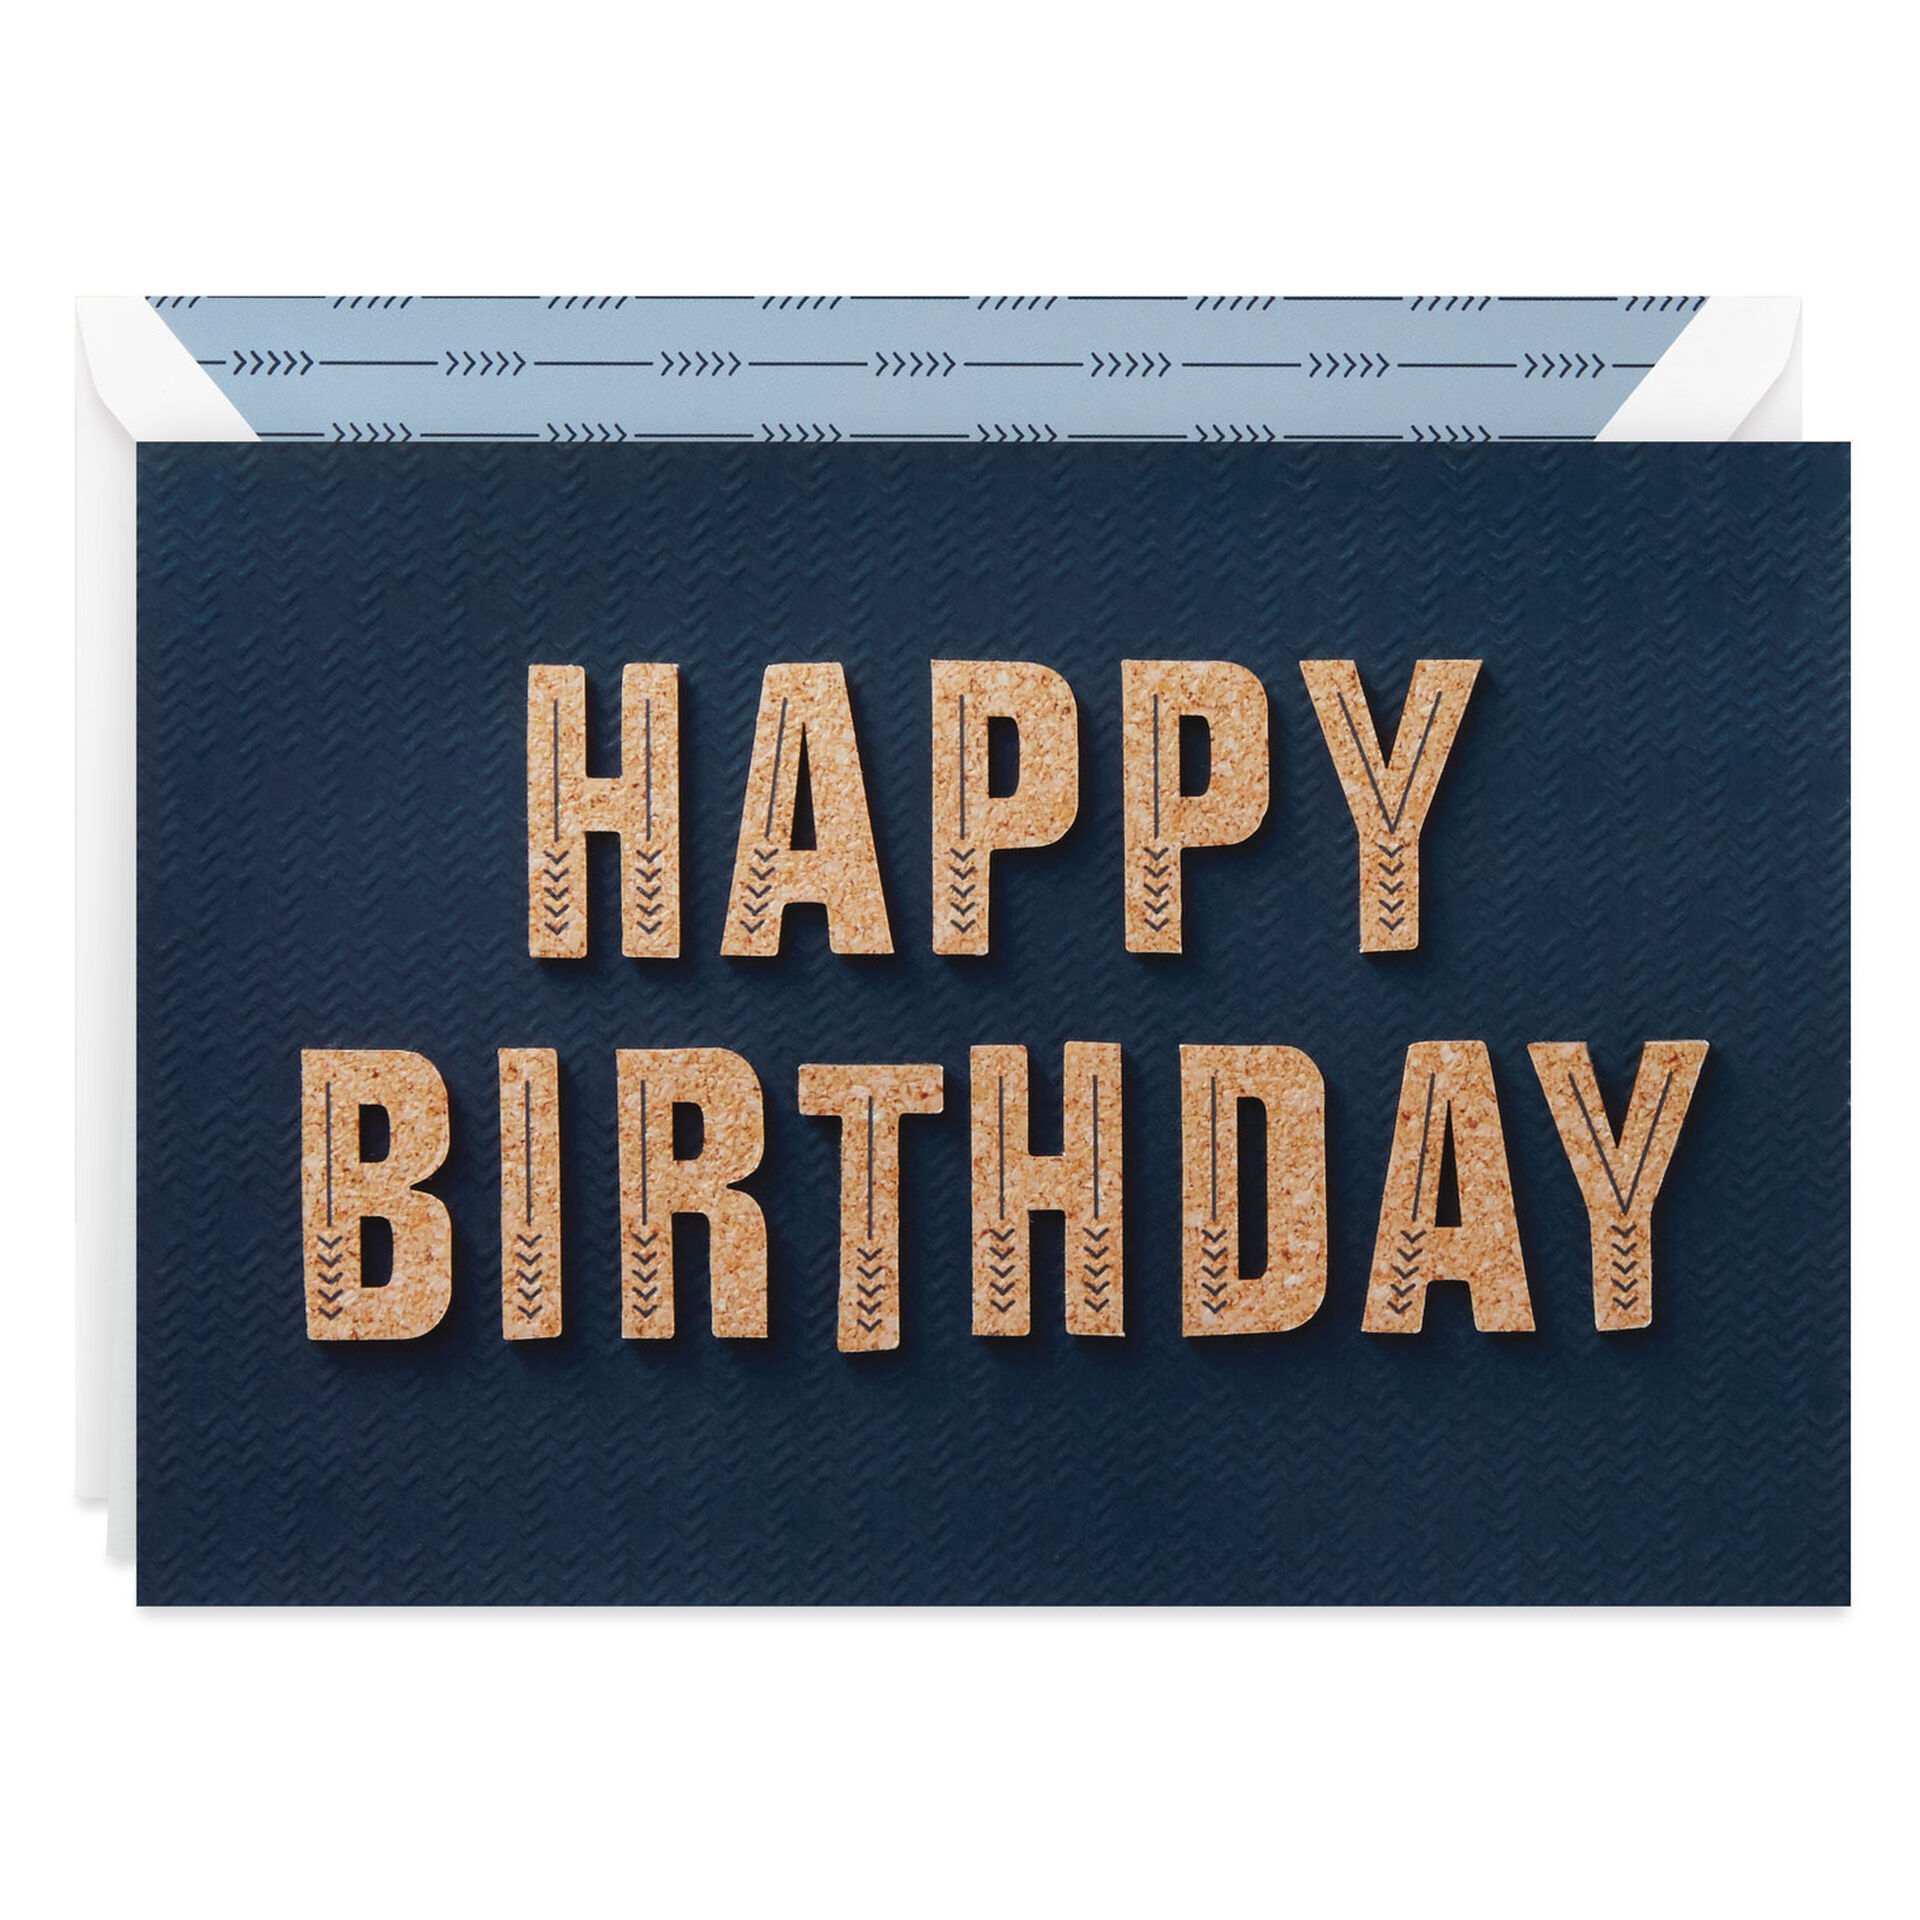 Arrows-and-Block-Letters-Birthday-Card-for-Him_599LAD9347_01